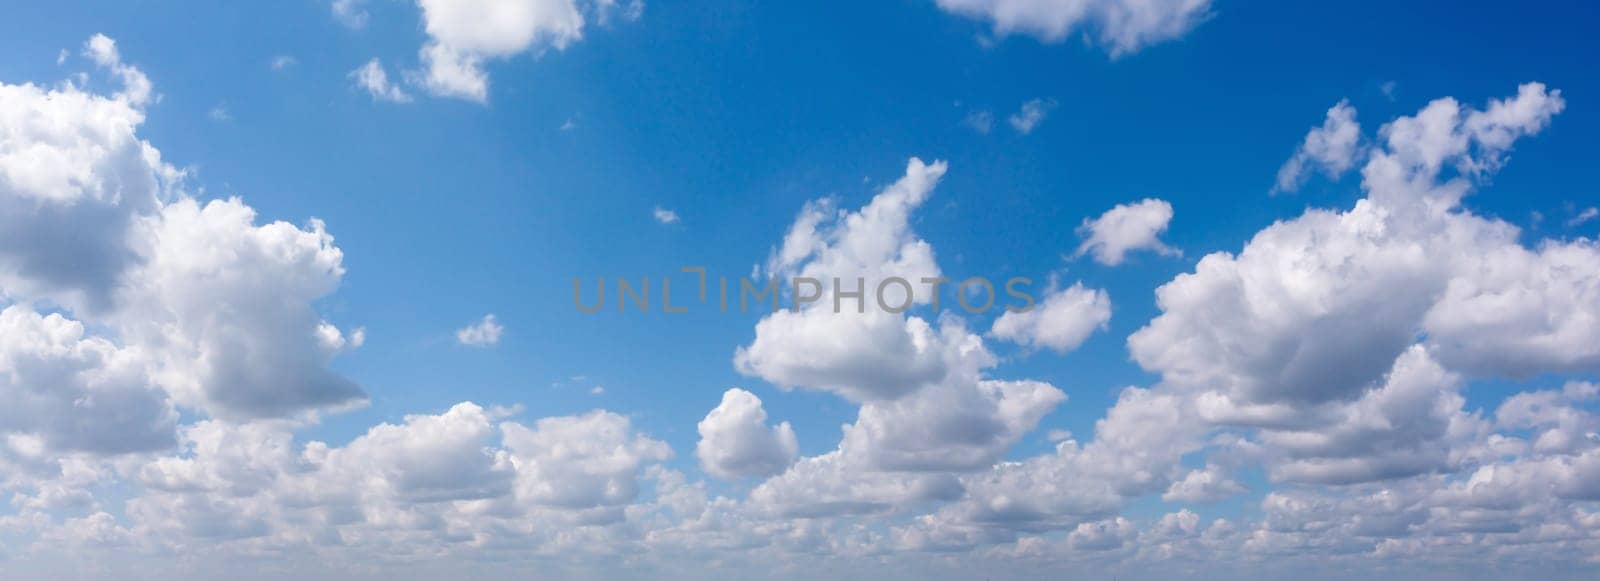 view of panorama blue sky with clouds and sun reflection by igor010